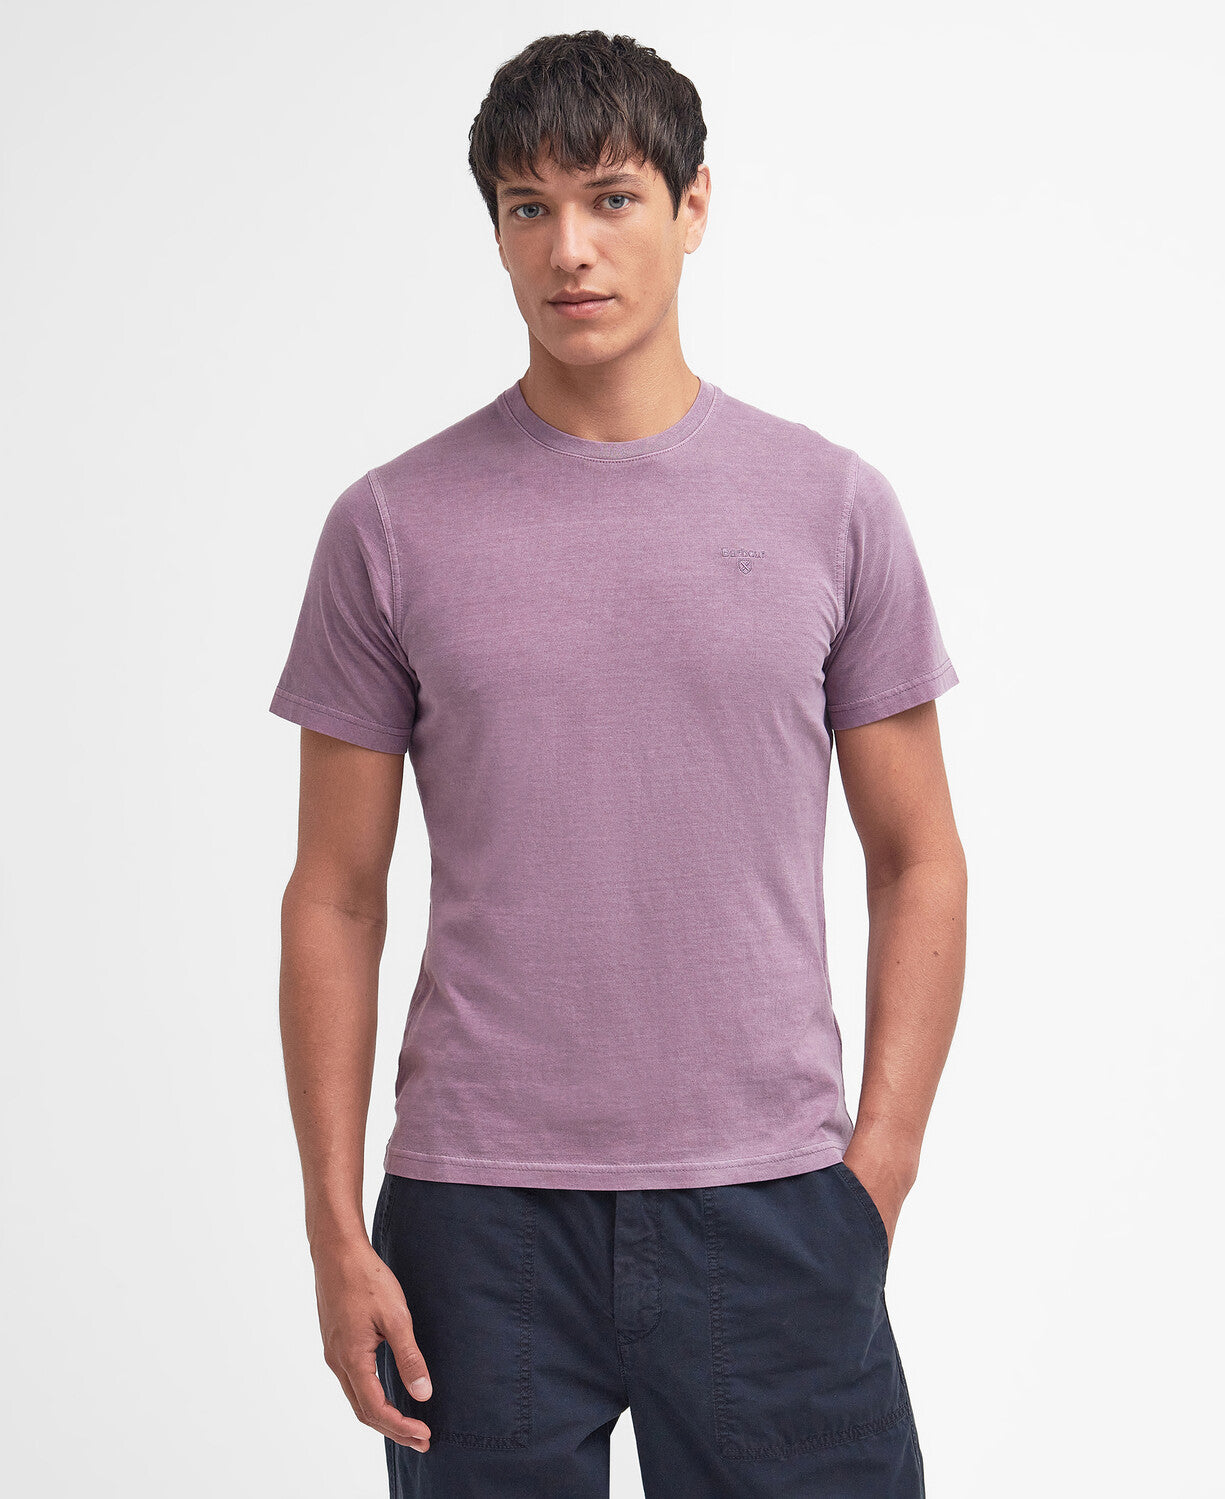 Barbour Garment Dyed T-Shirt